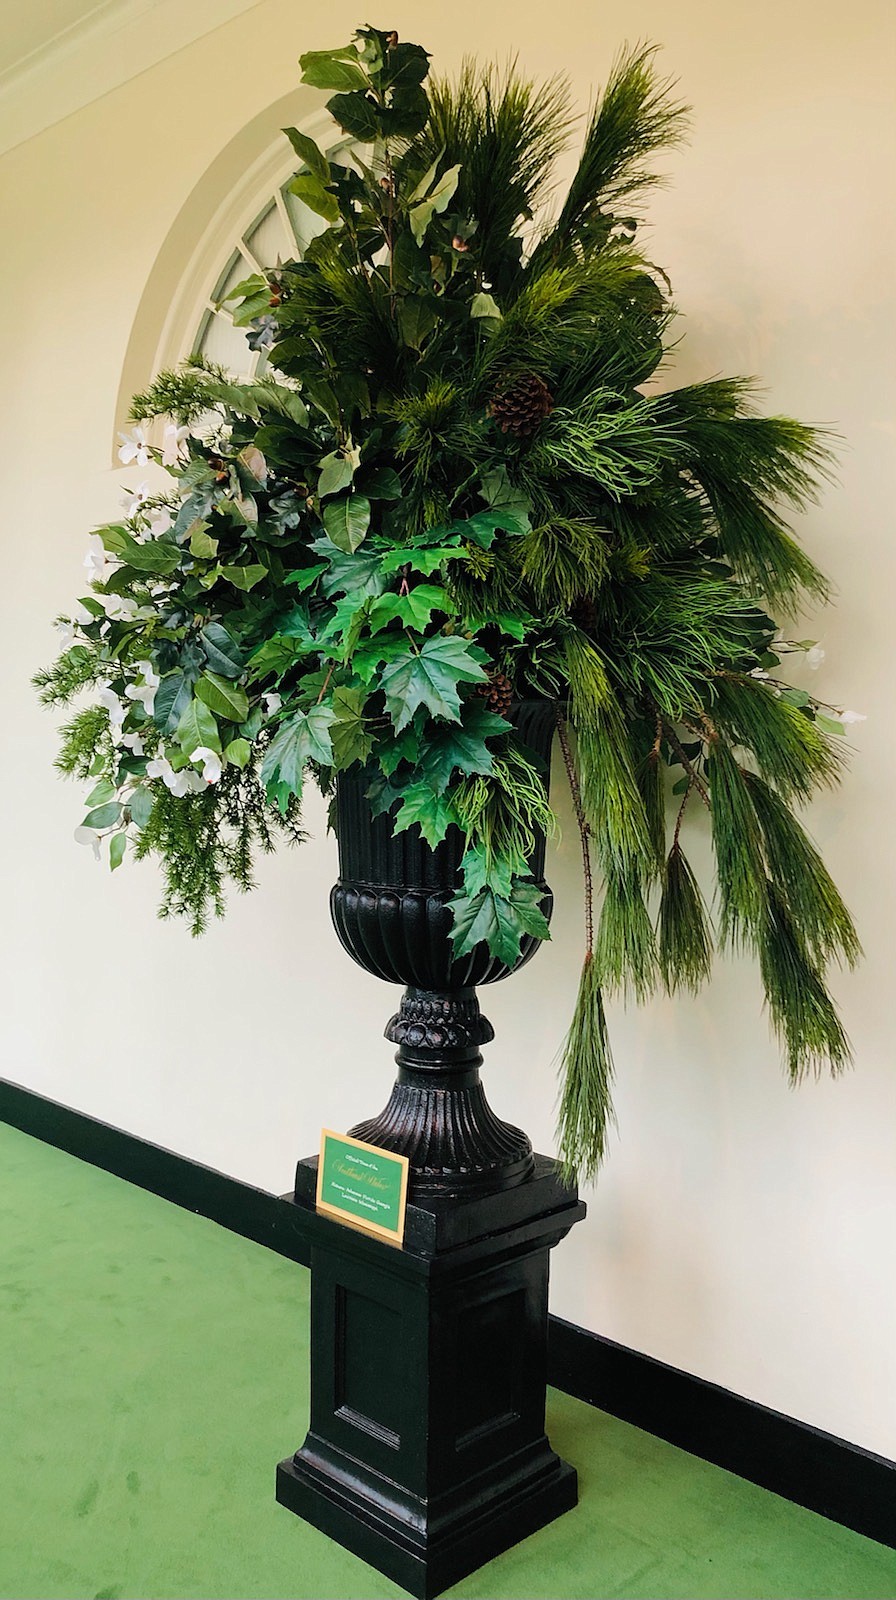 An urn representing Arkansas and other Southeastern states was one of the projects Liz Bullock worked on as a decorator at the White House. (Contributed)